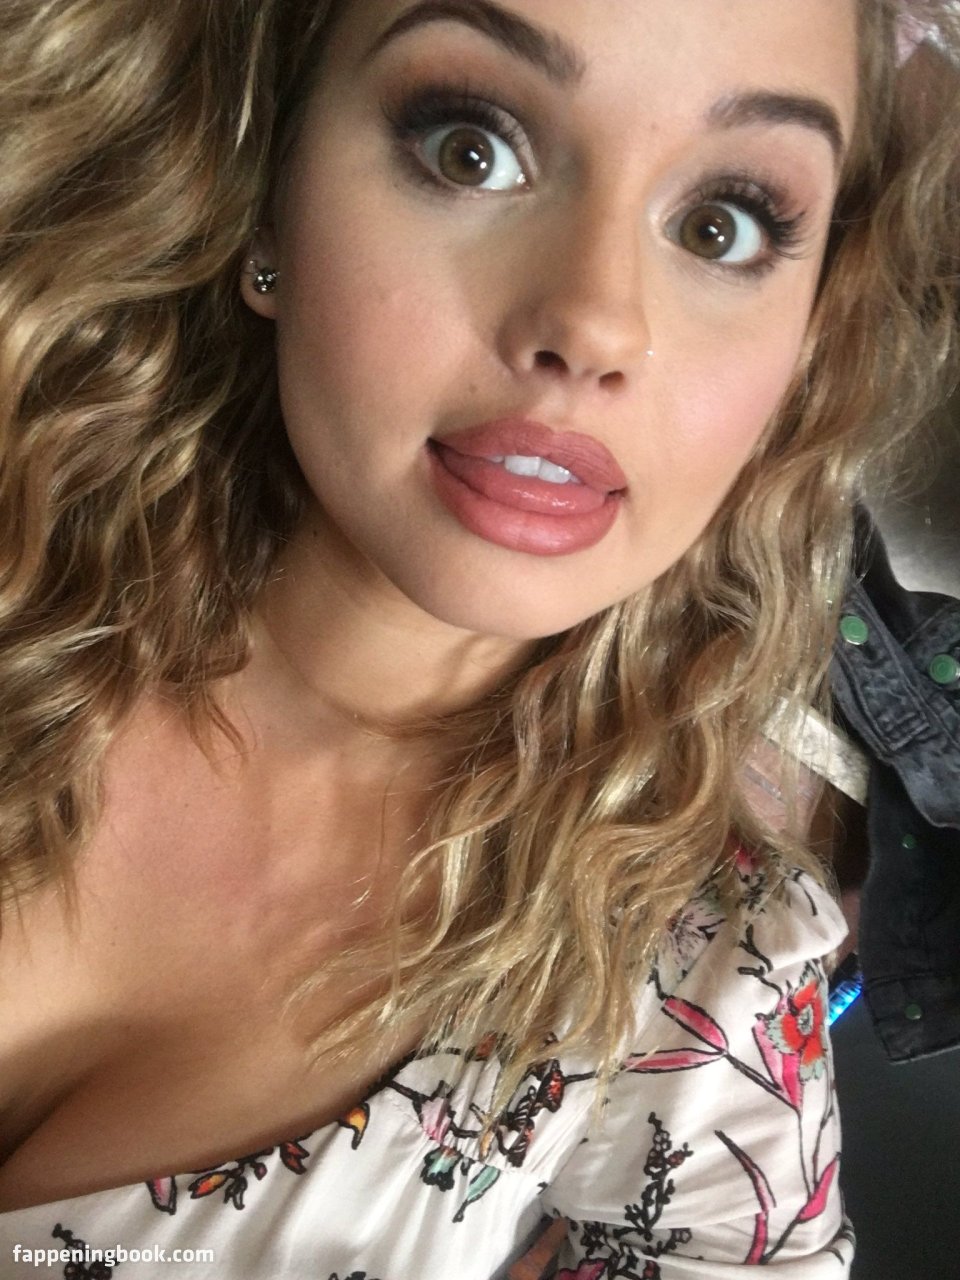 Ryan the fappening debby 51 Sexiest